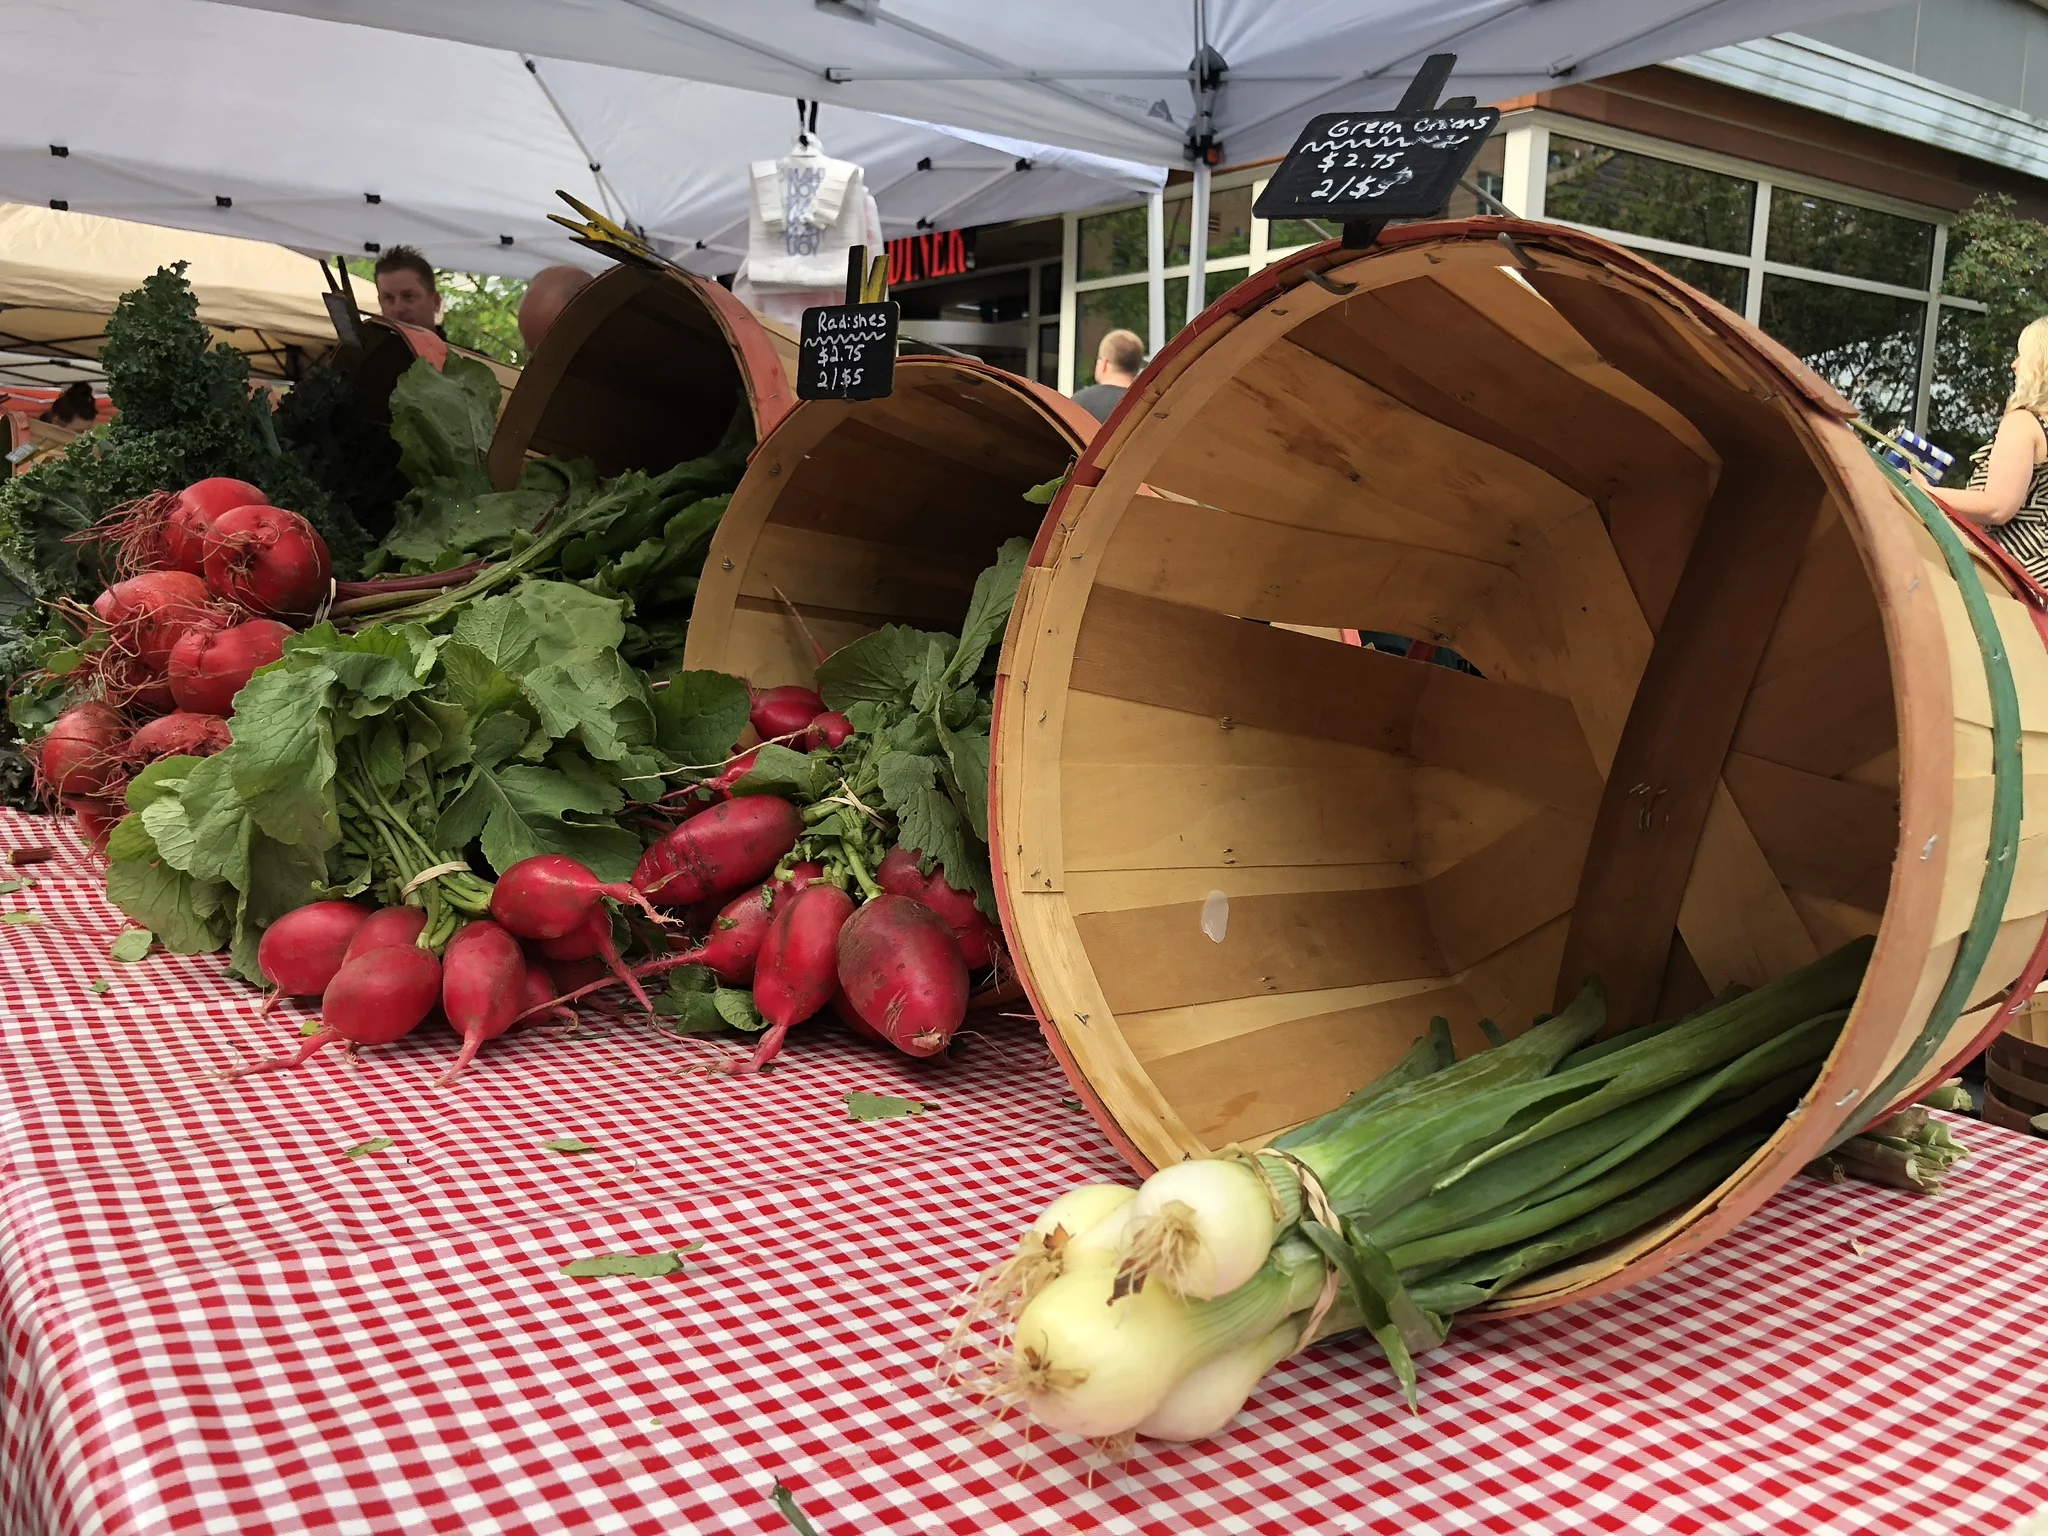 radishes and onions at a farmers market in columbus ohio